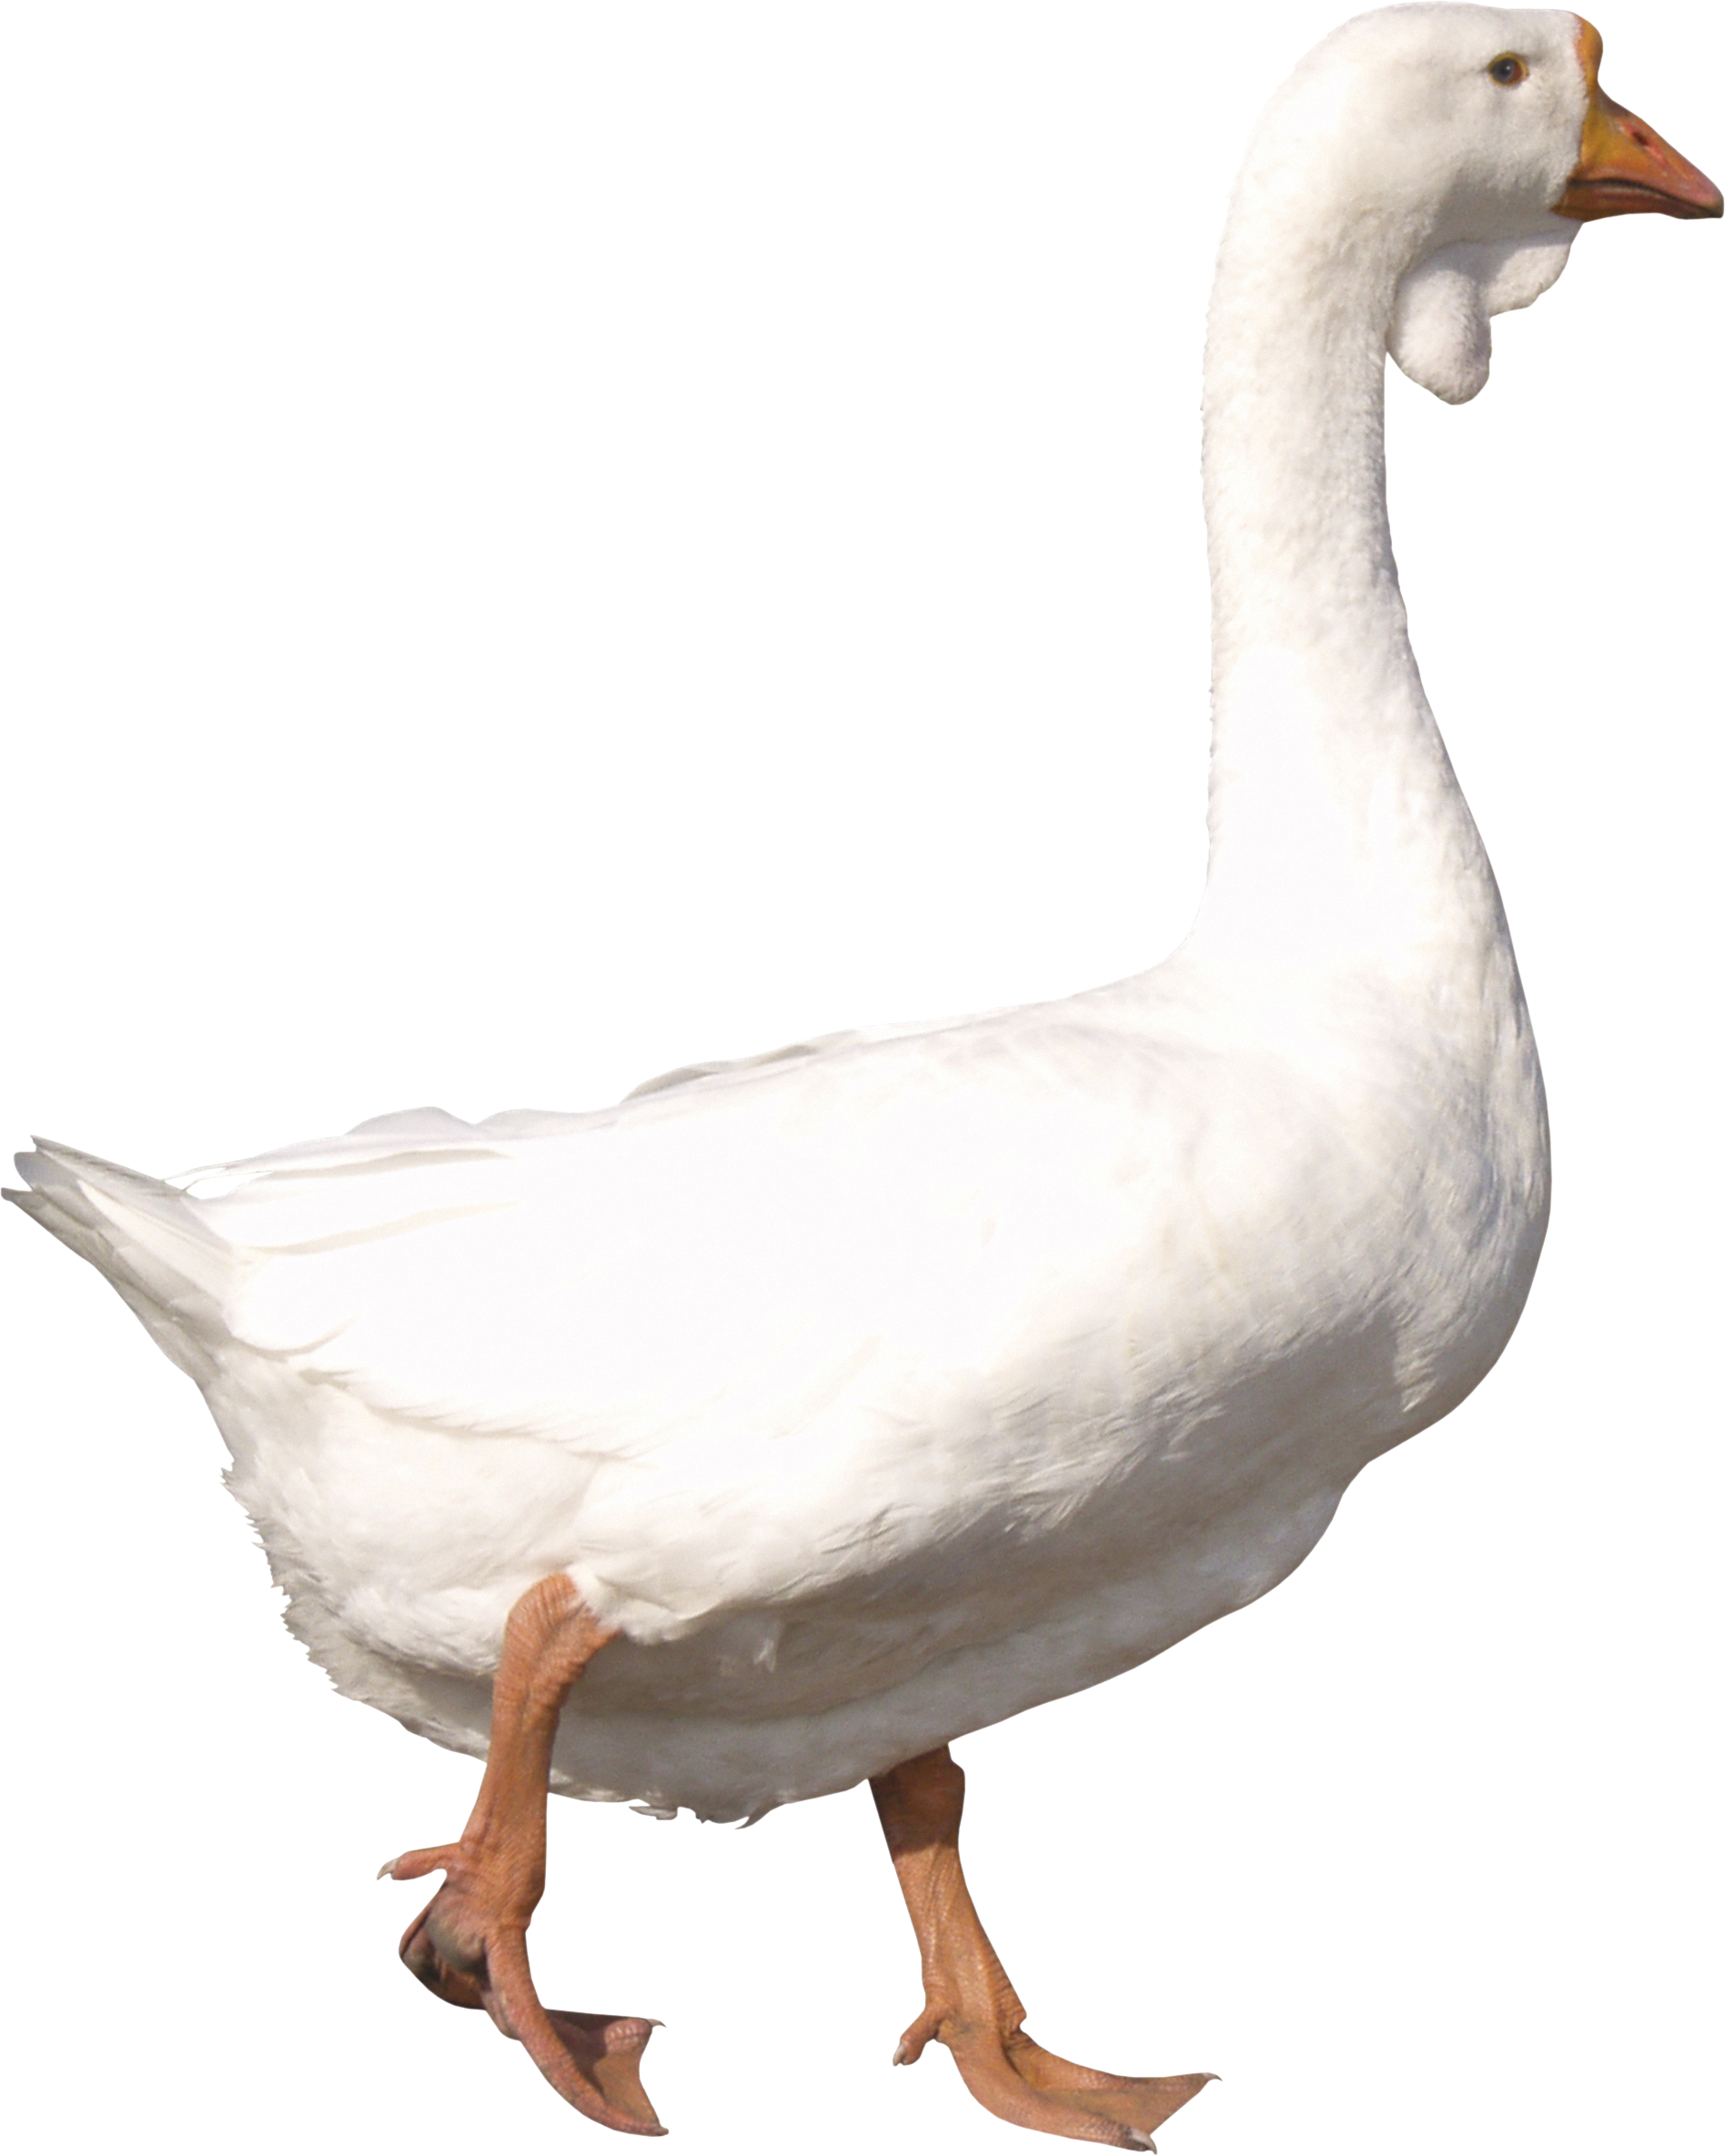 A White Goose With A Black Background